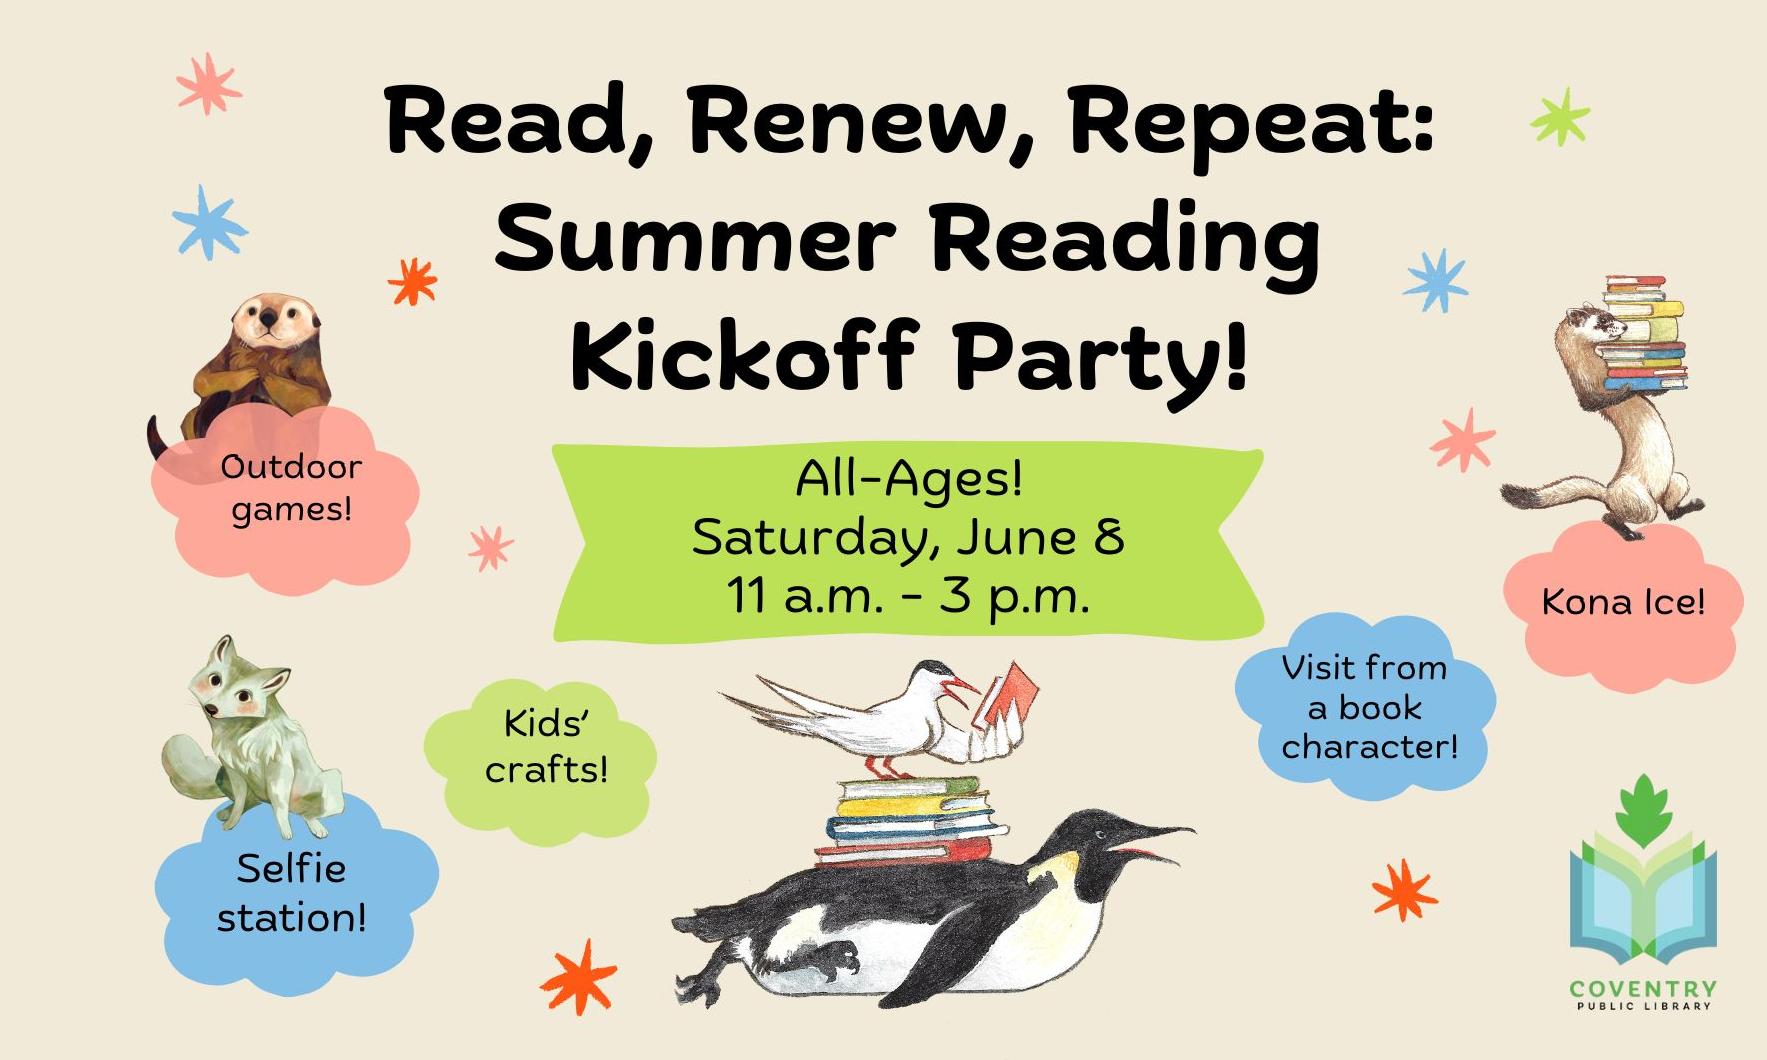 Read, Renew, Repeat: Summer Reading Kick-off Party! All-Ages, Saturday, June 8th 11 a.m. - 3 p.m.